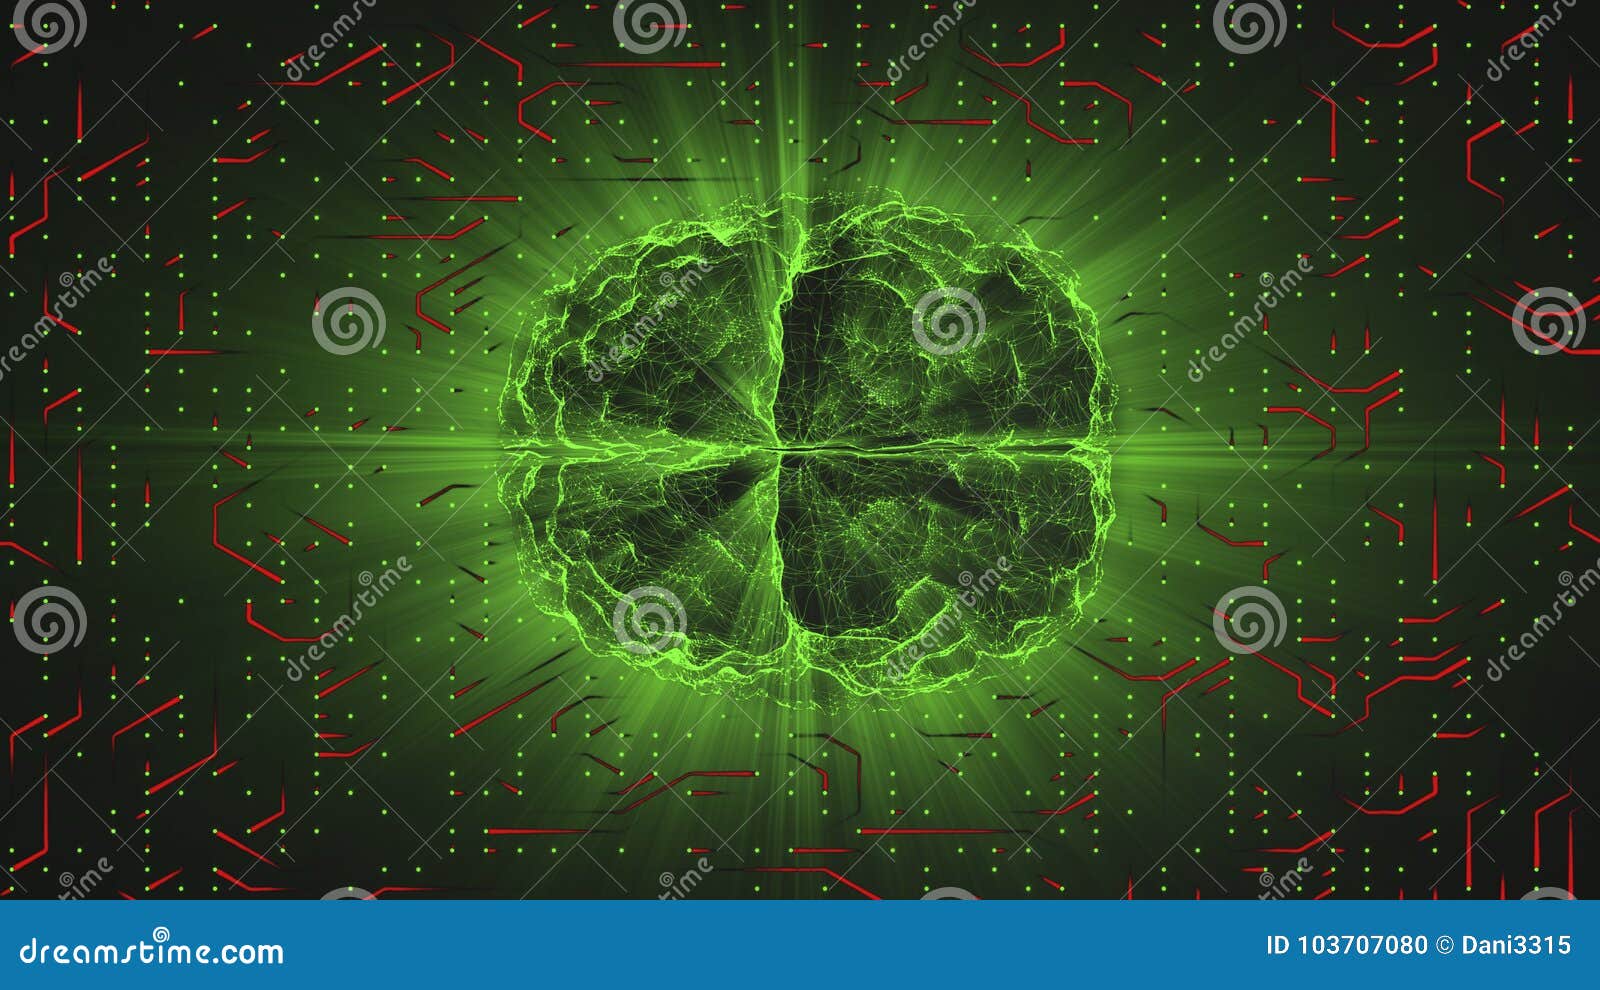 green glowing brain wired on red neural surface or electronic conductors